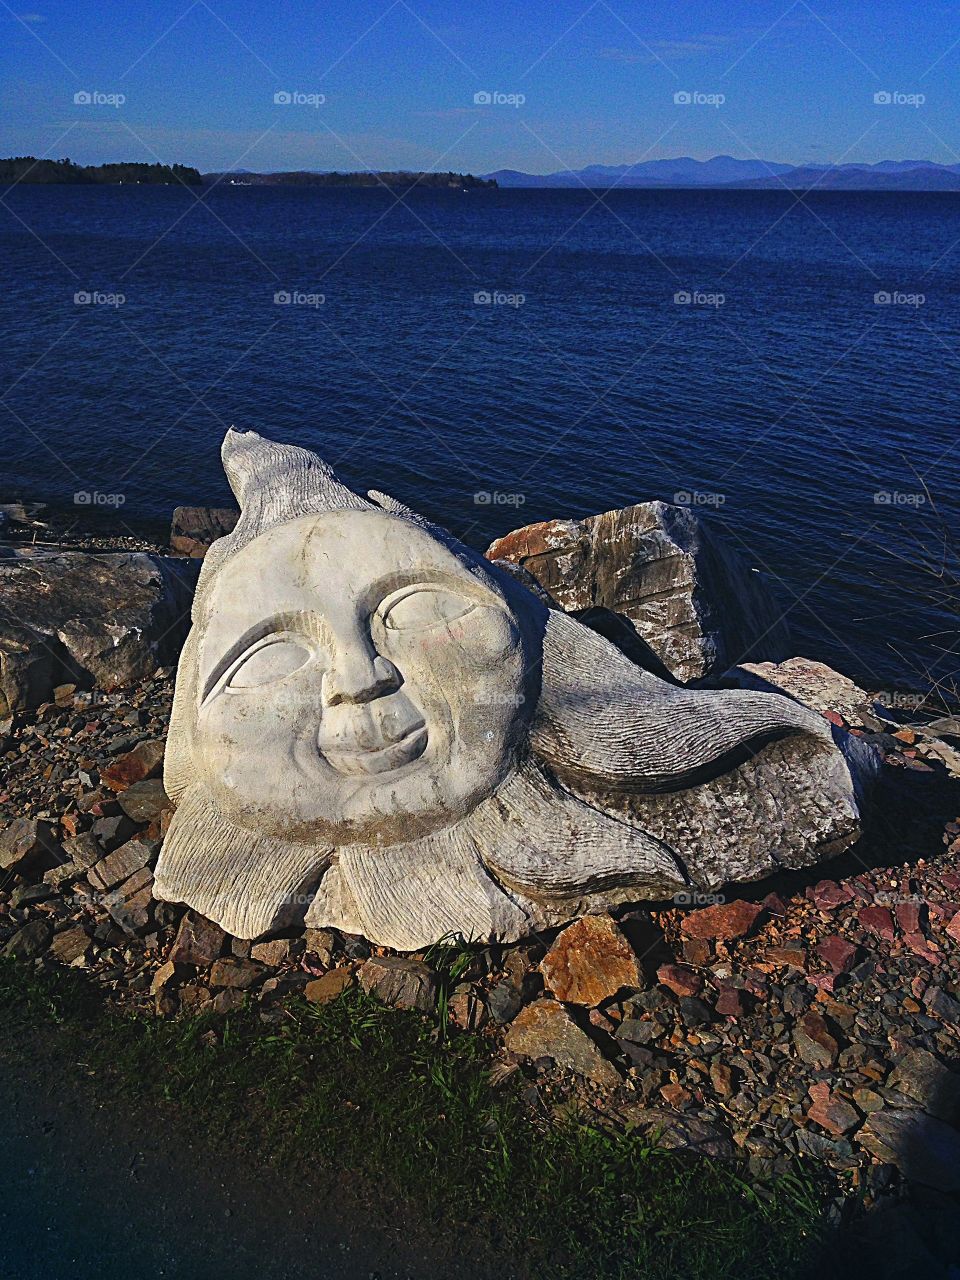 Carved rock in the shape of sunshine makes me smile - happy grey mission